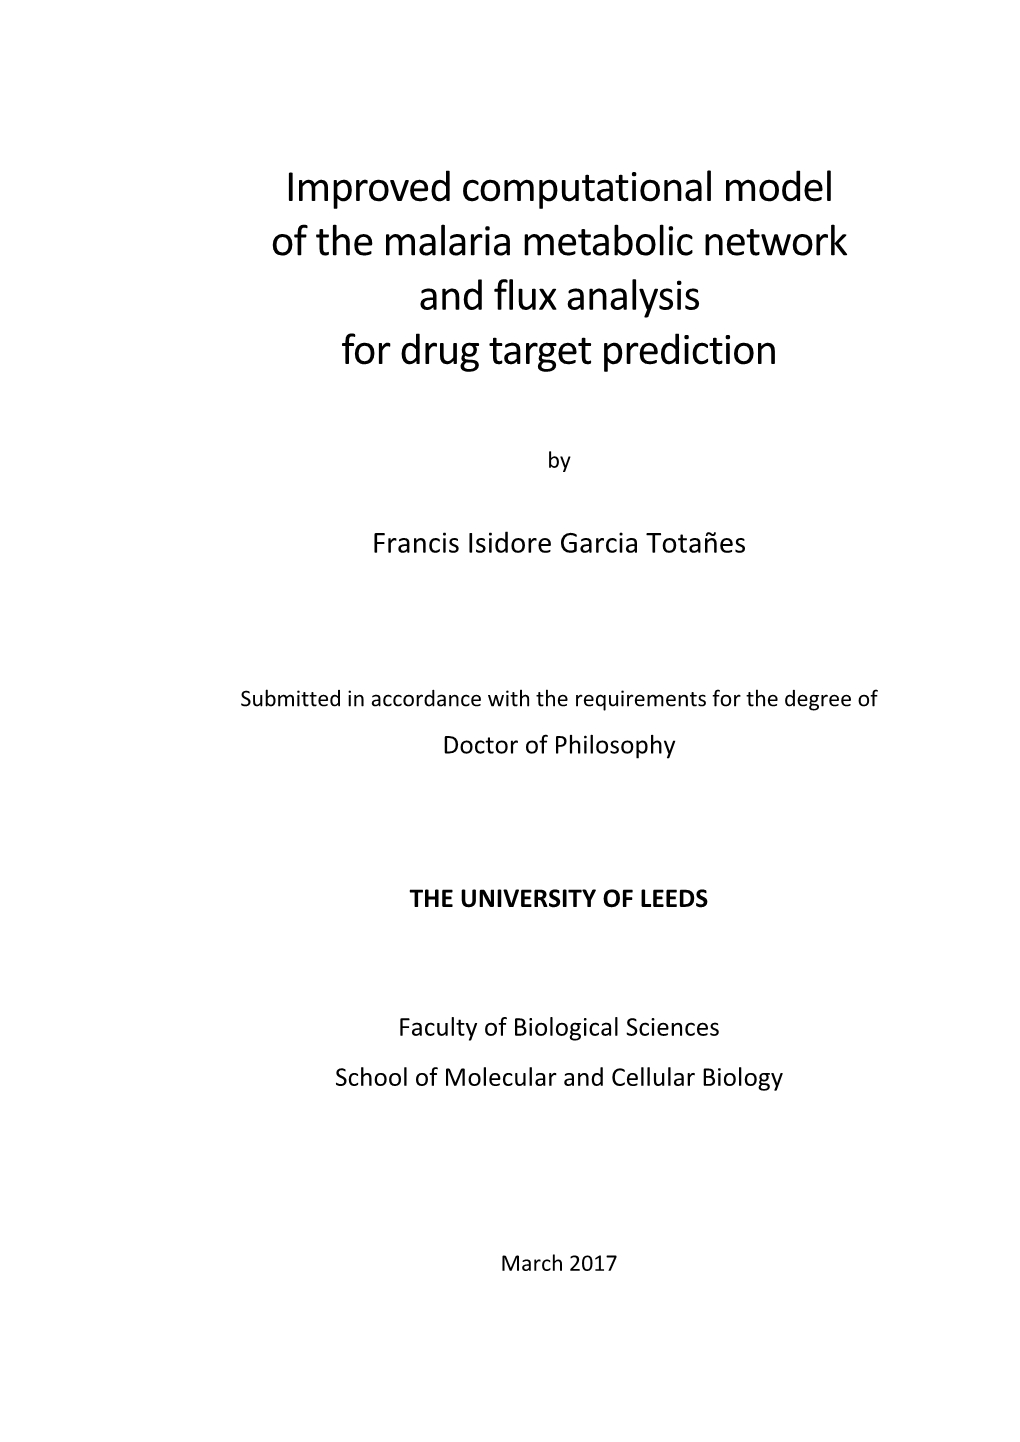 Improved Computational Model of the Malaria Metabolic Network and Flux Analysis for Drug Target Prediction